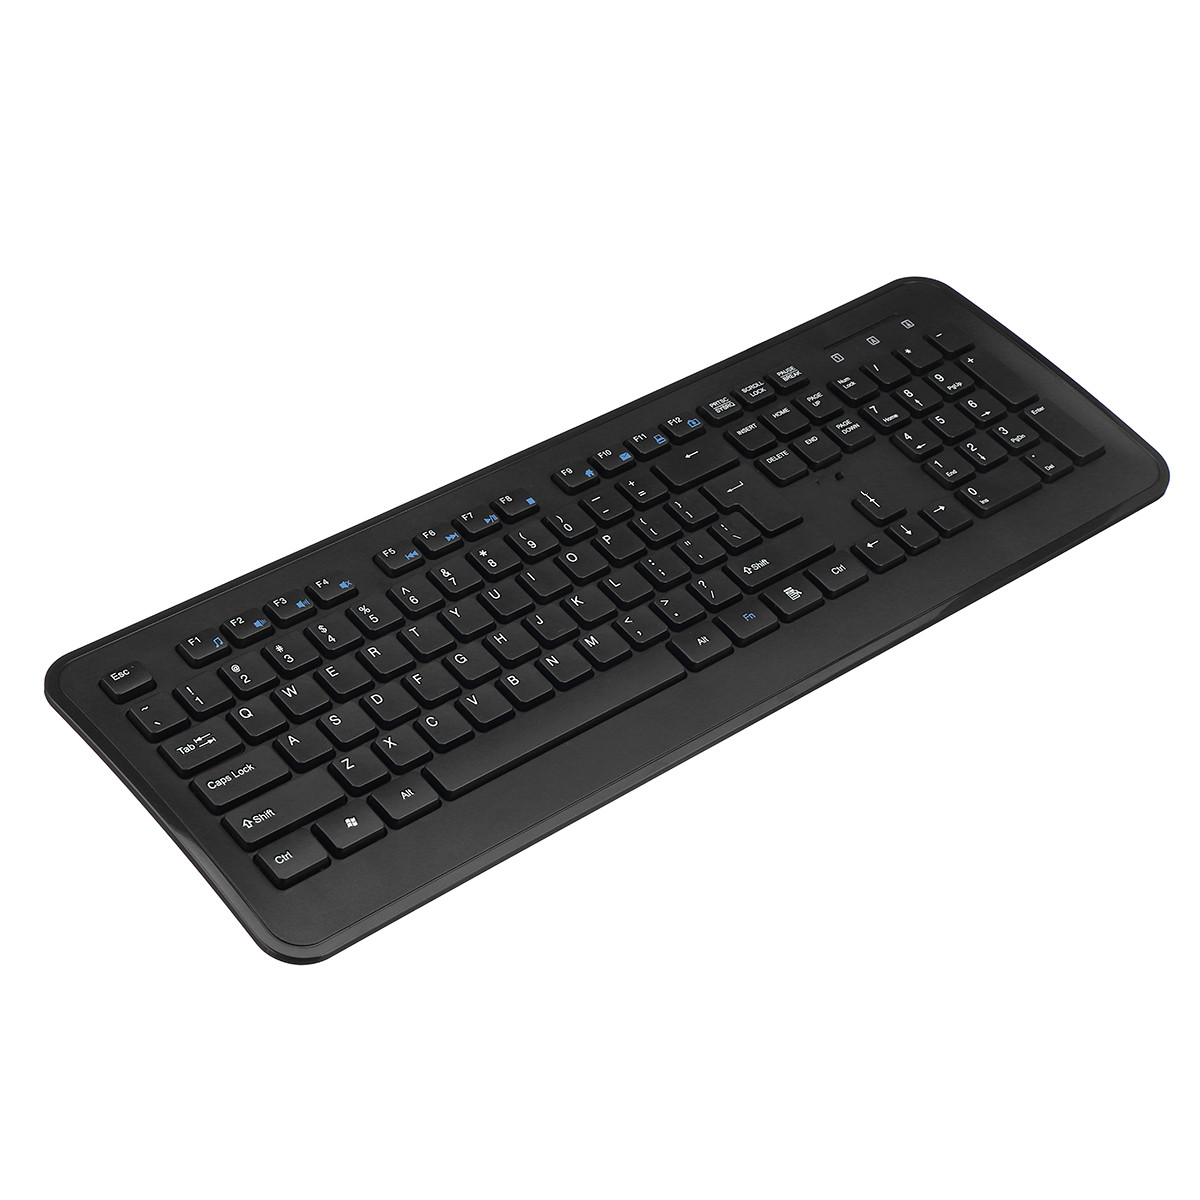 Find AIGO WQ640 Wired Keyboard Mouse Set 104 Keys Office Optical Keyboard 2400DPI Ergonomic Mouse Kit for Keyboard Laptop PC for Sale on Gipsybee.com with cryptocurrencies